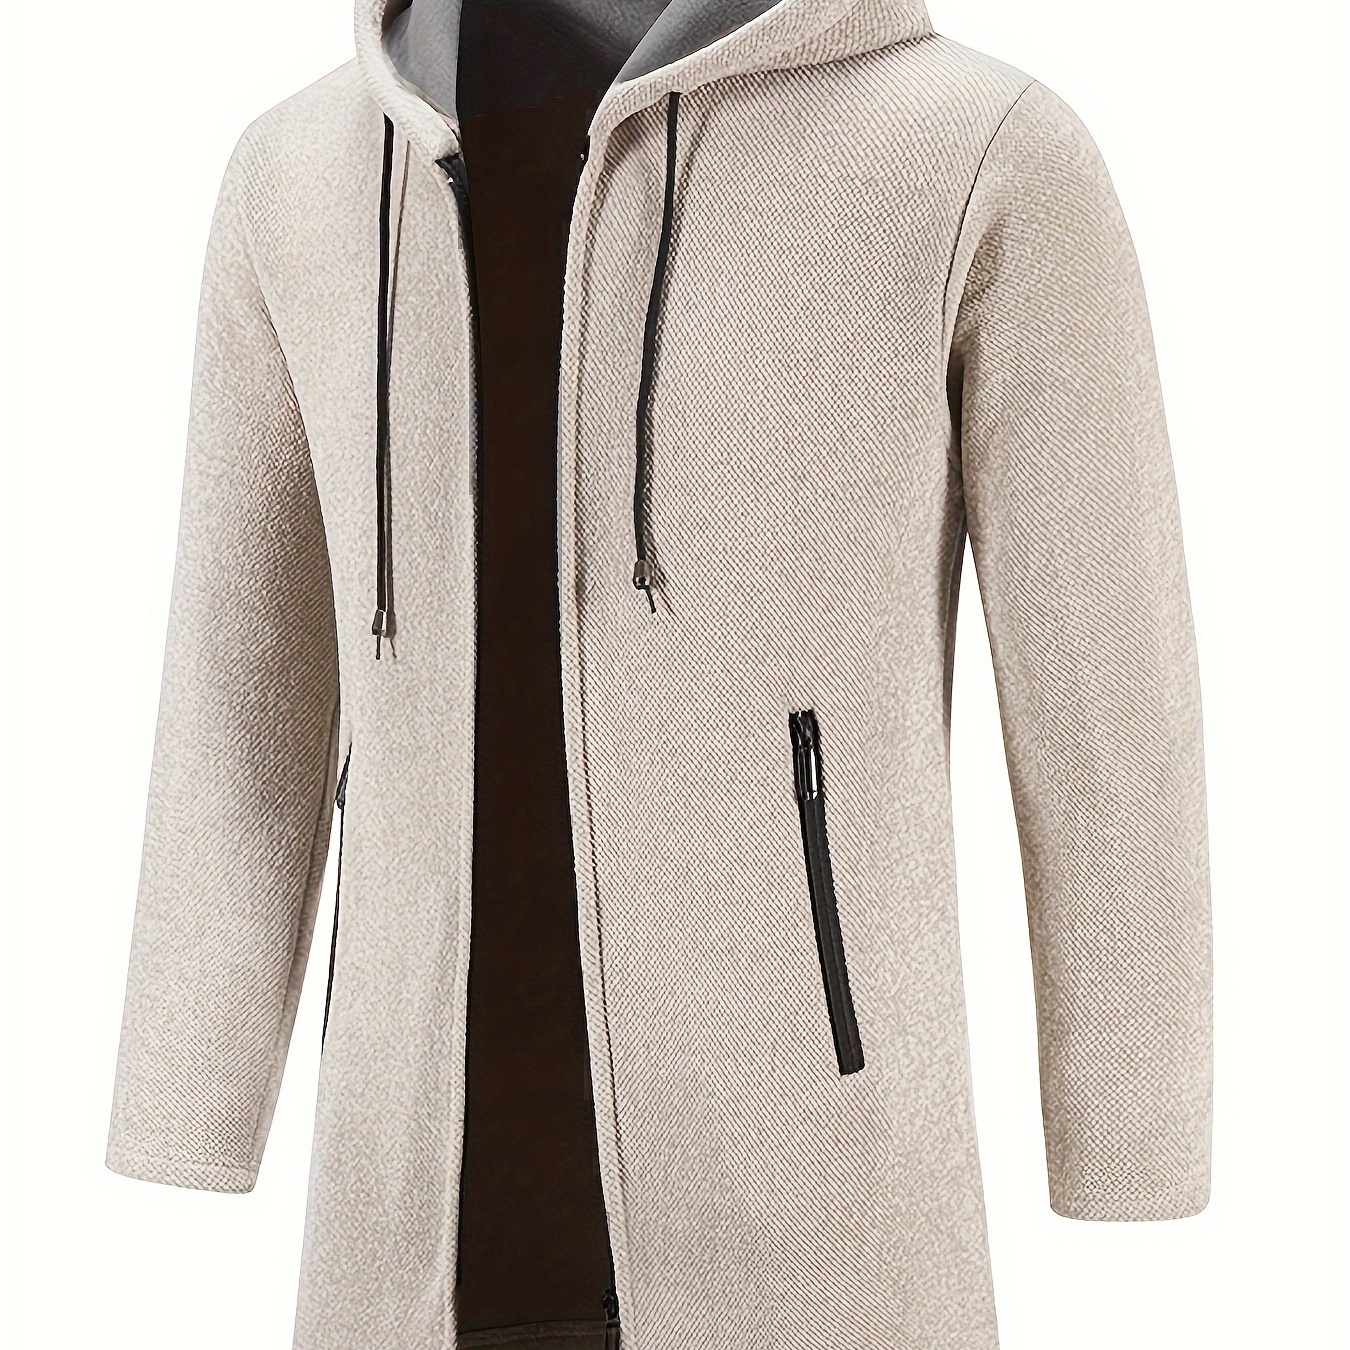 

Men's Mid Long Comfy And Warm Solid Hooded Long Sleeve And Zipper Down Knit Sweater Jacket With Zippered Pockets, Casual Jacket For Autumn And Winter Outdoors Wear